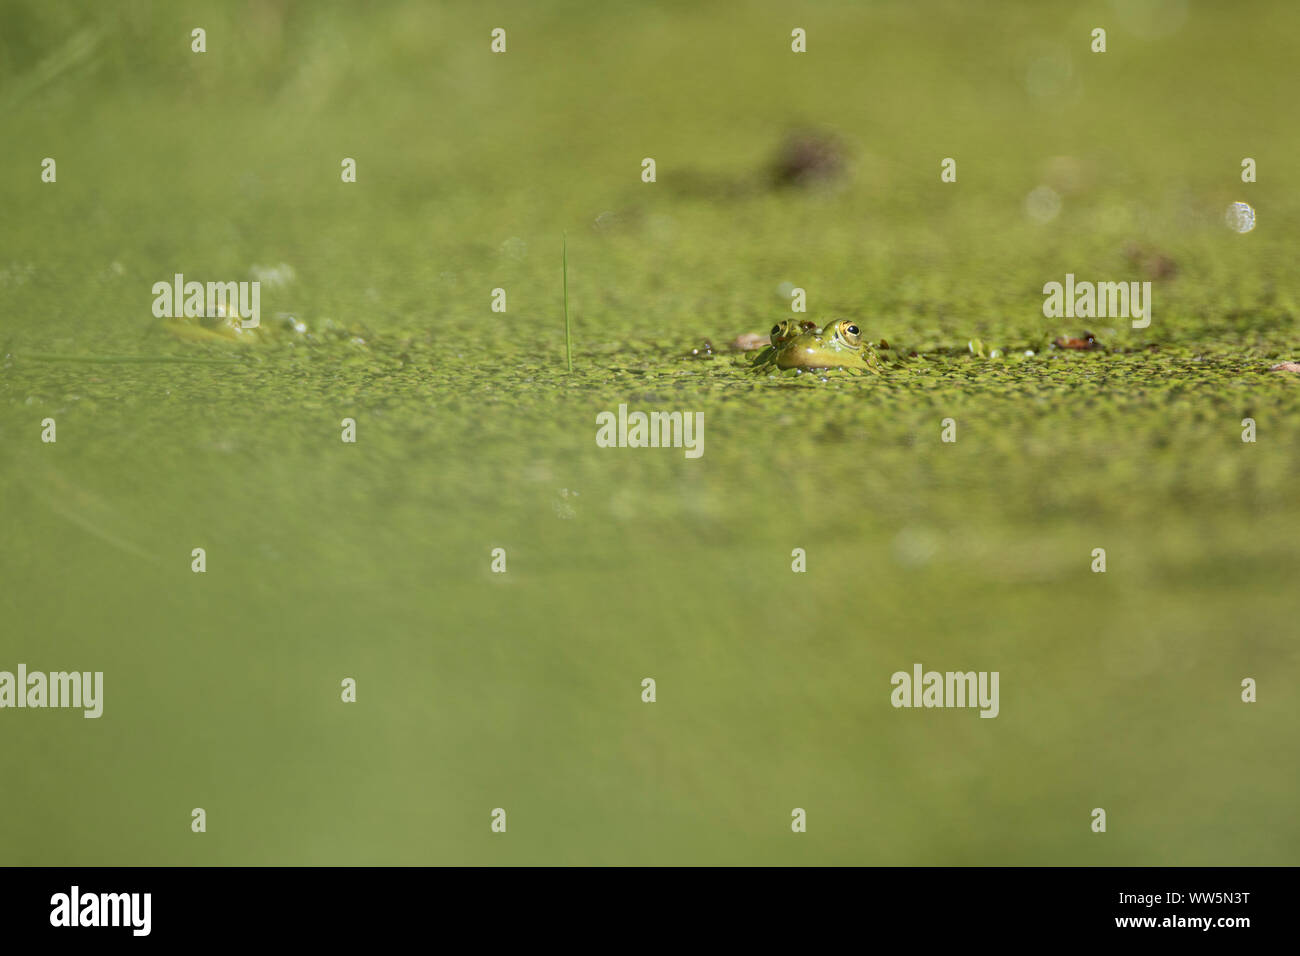 Green frog, frog, in pond with duckweeds Stock Photo